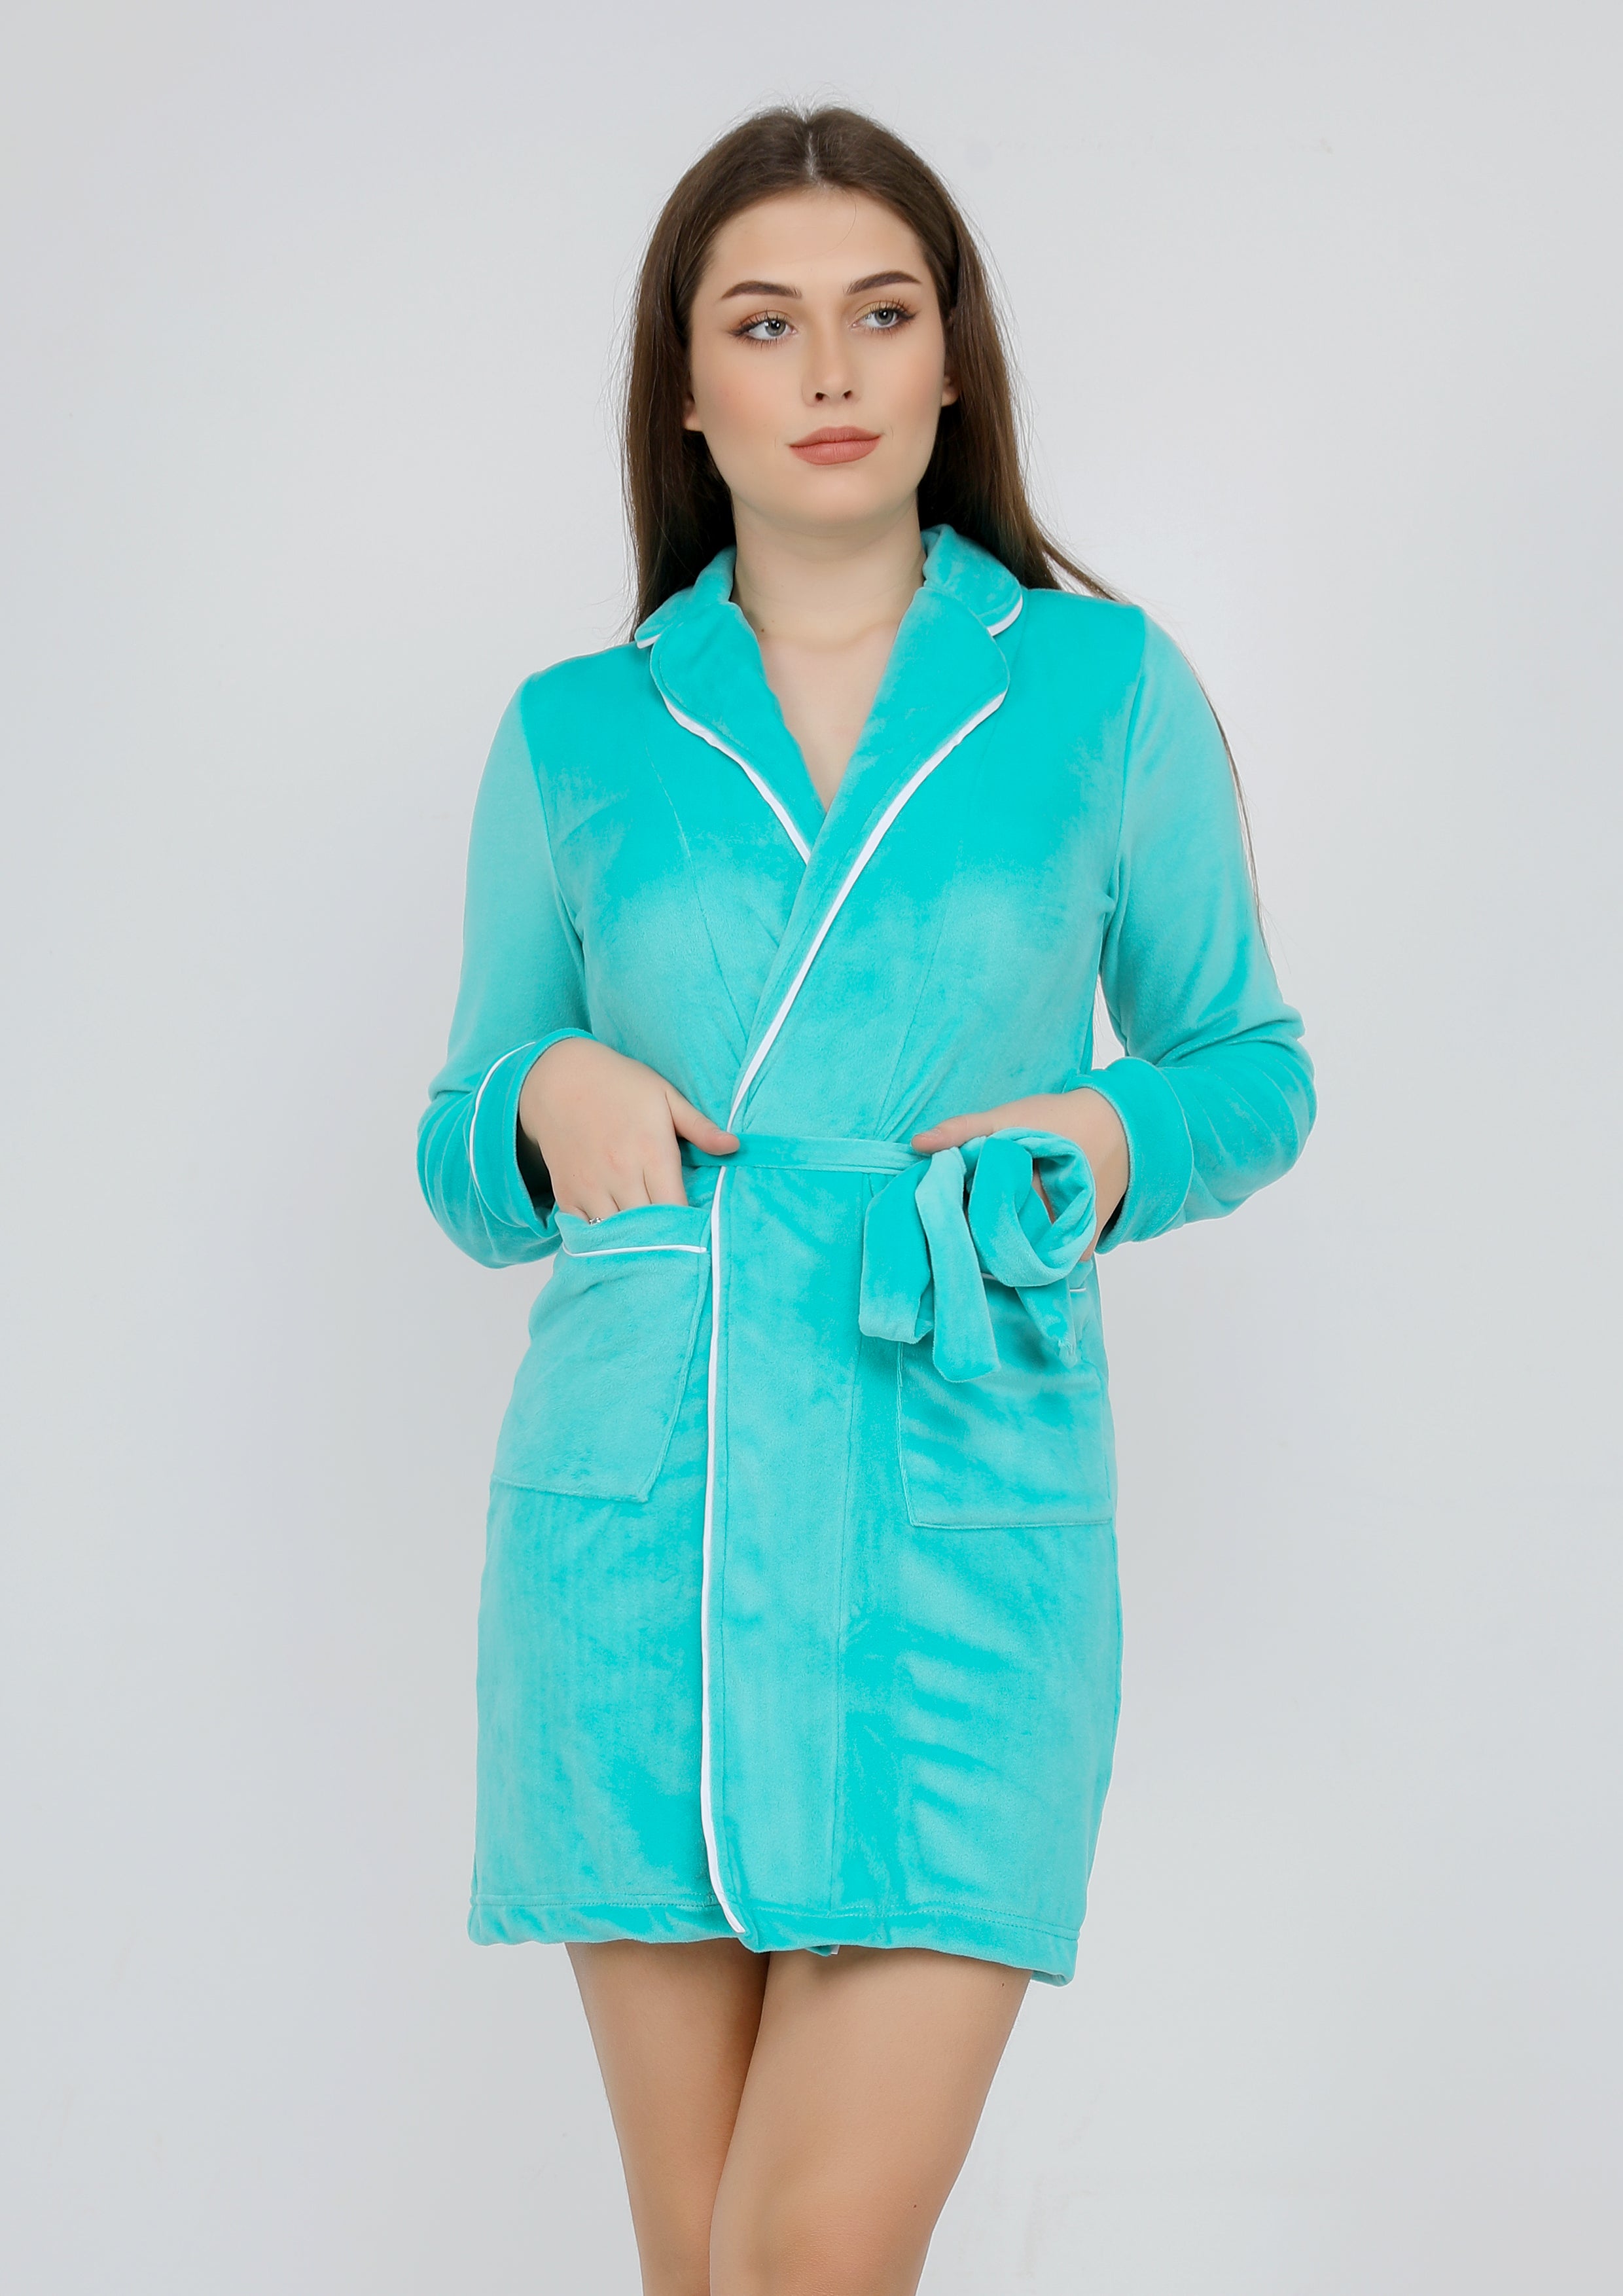 Turquoise short dress with Heidi belt and lining on both sides